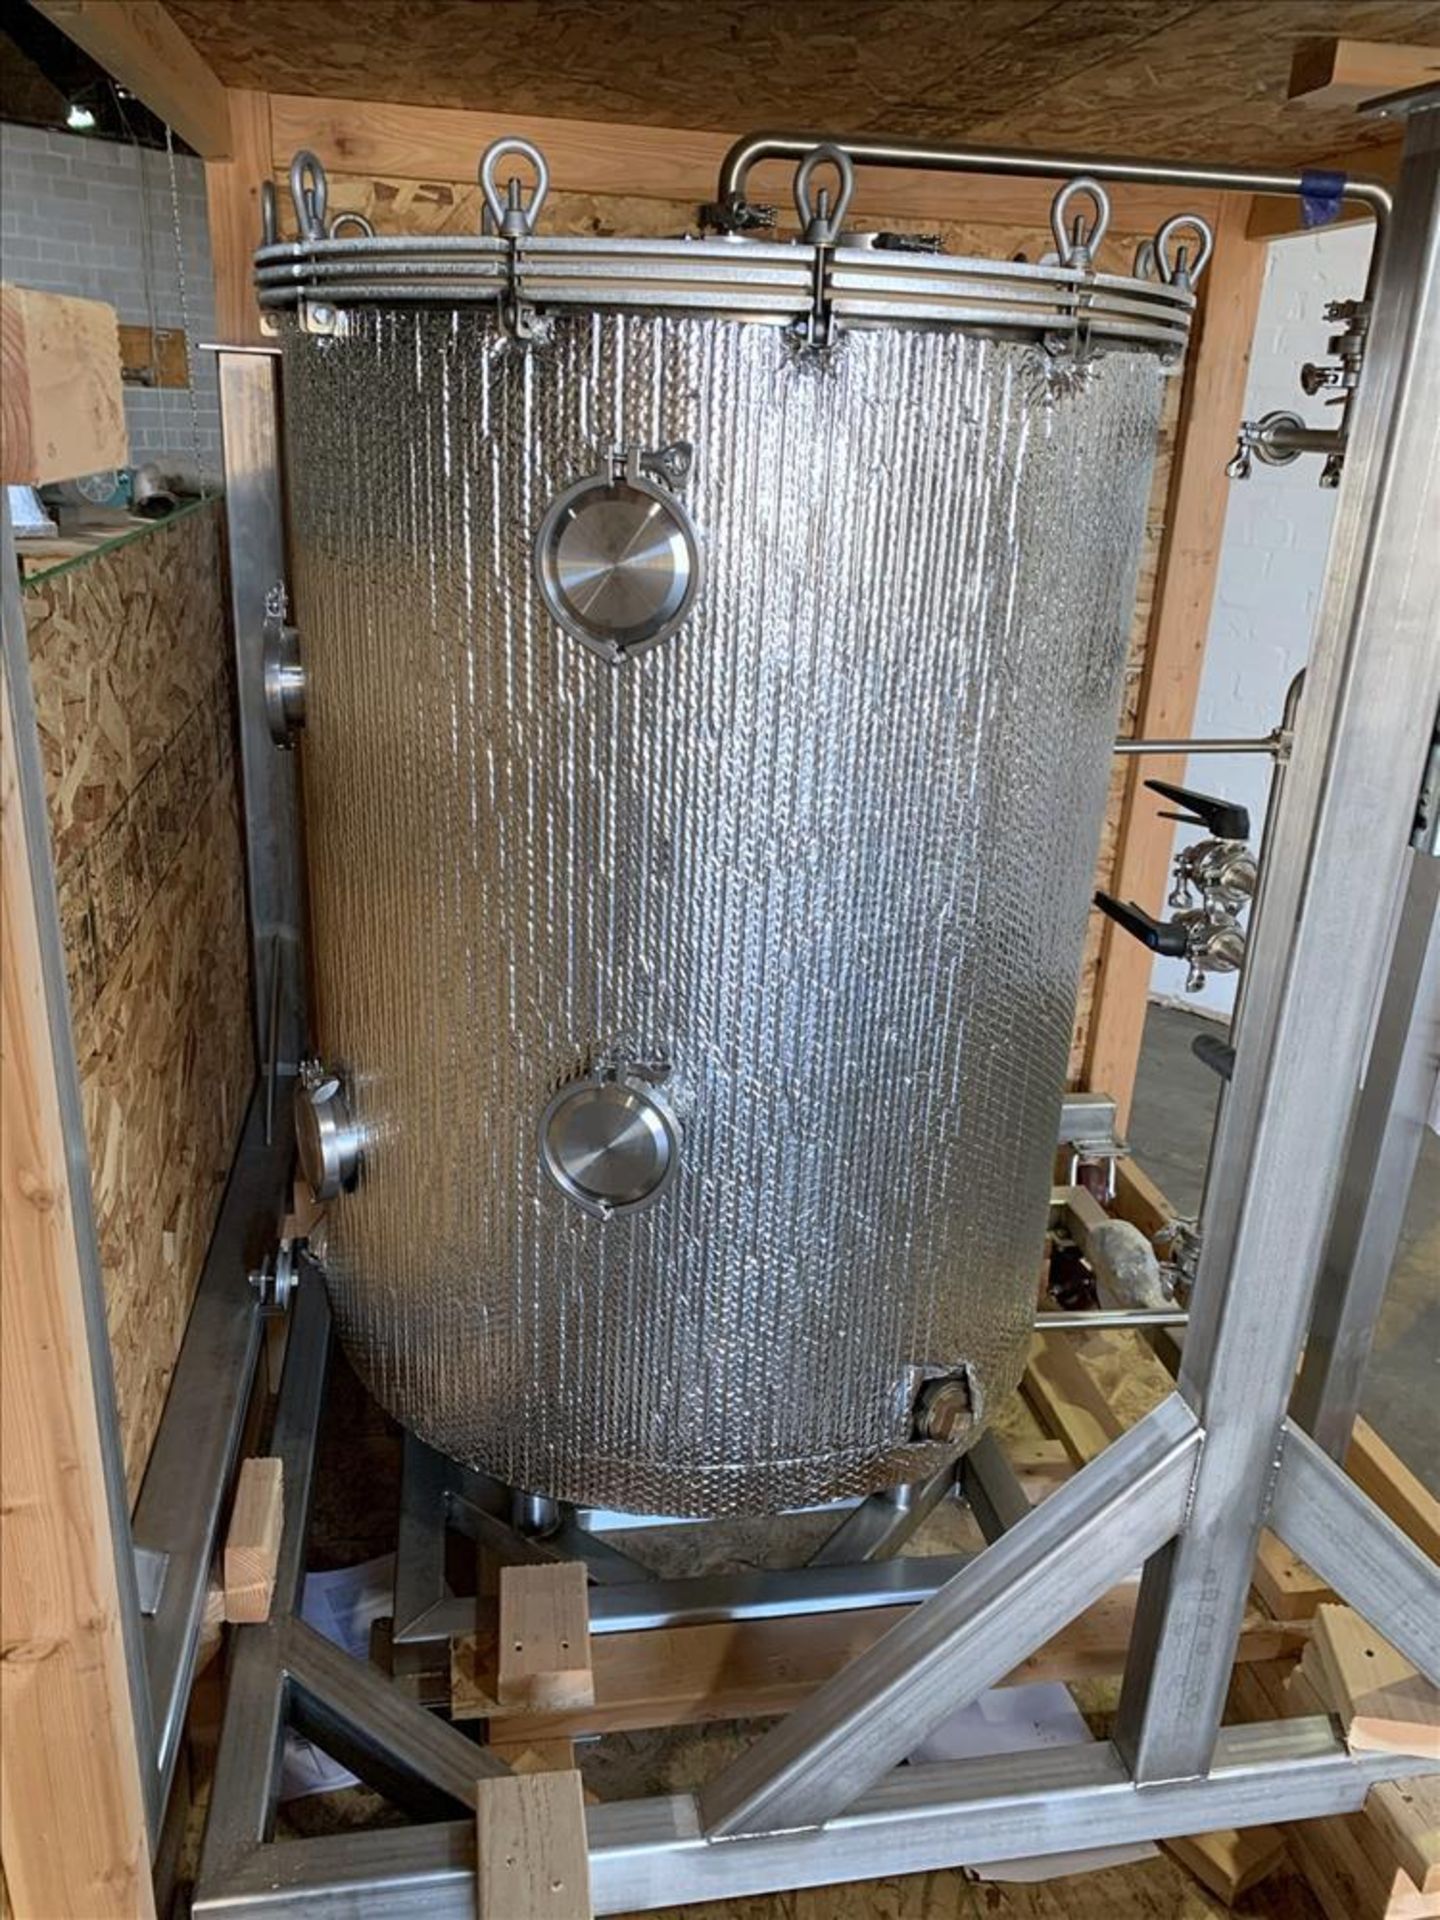 UNUSED - New In Crates - Eden Labs 3-Circuit Ethanol Platform Extraction & Solvent Recovery System - Image 53 of 152